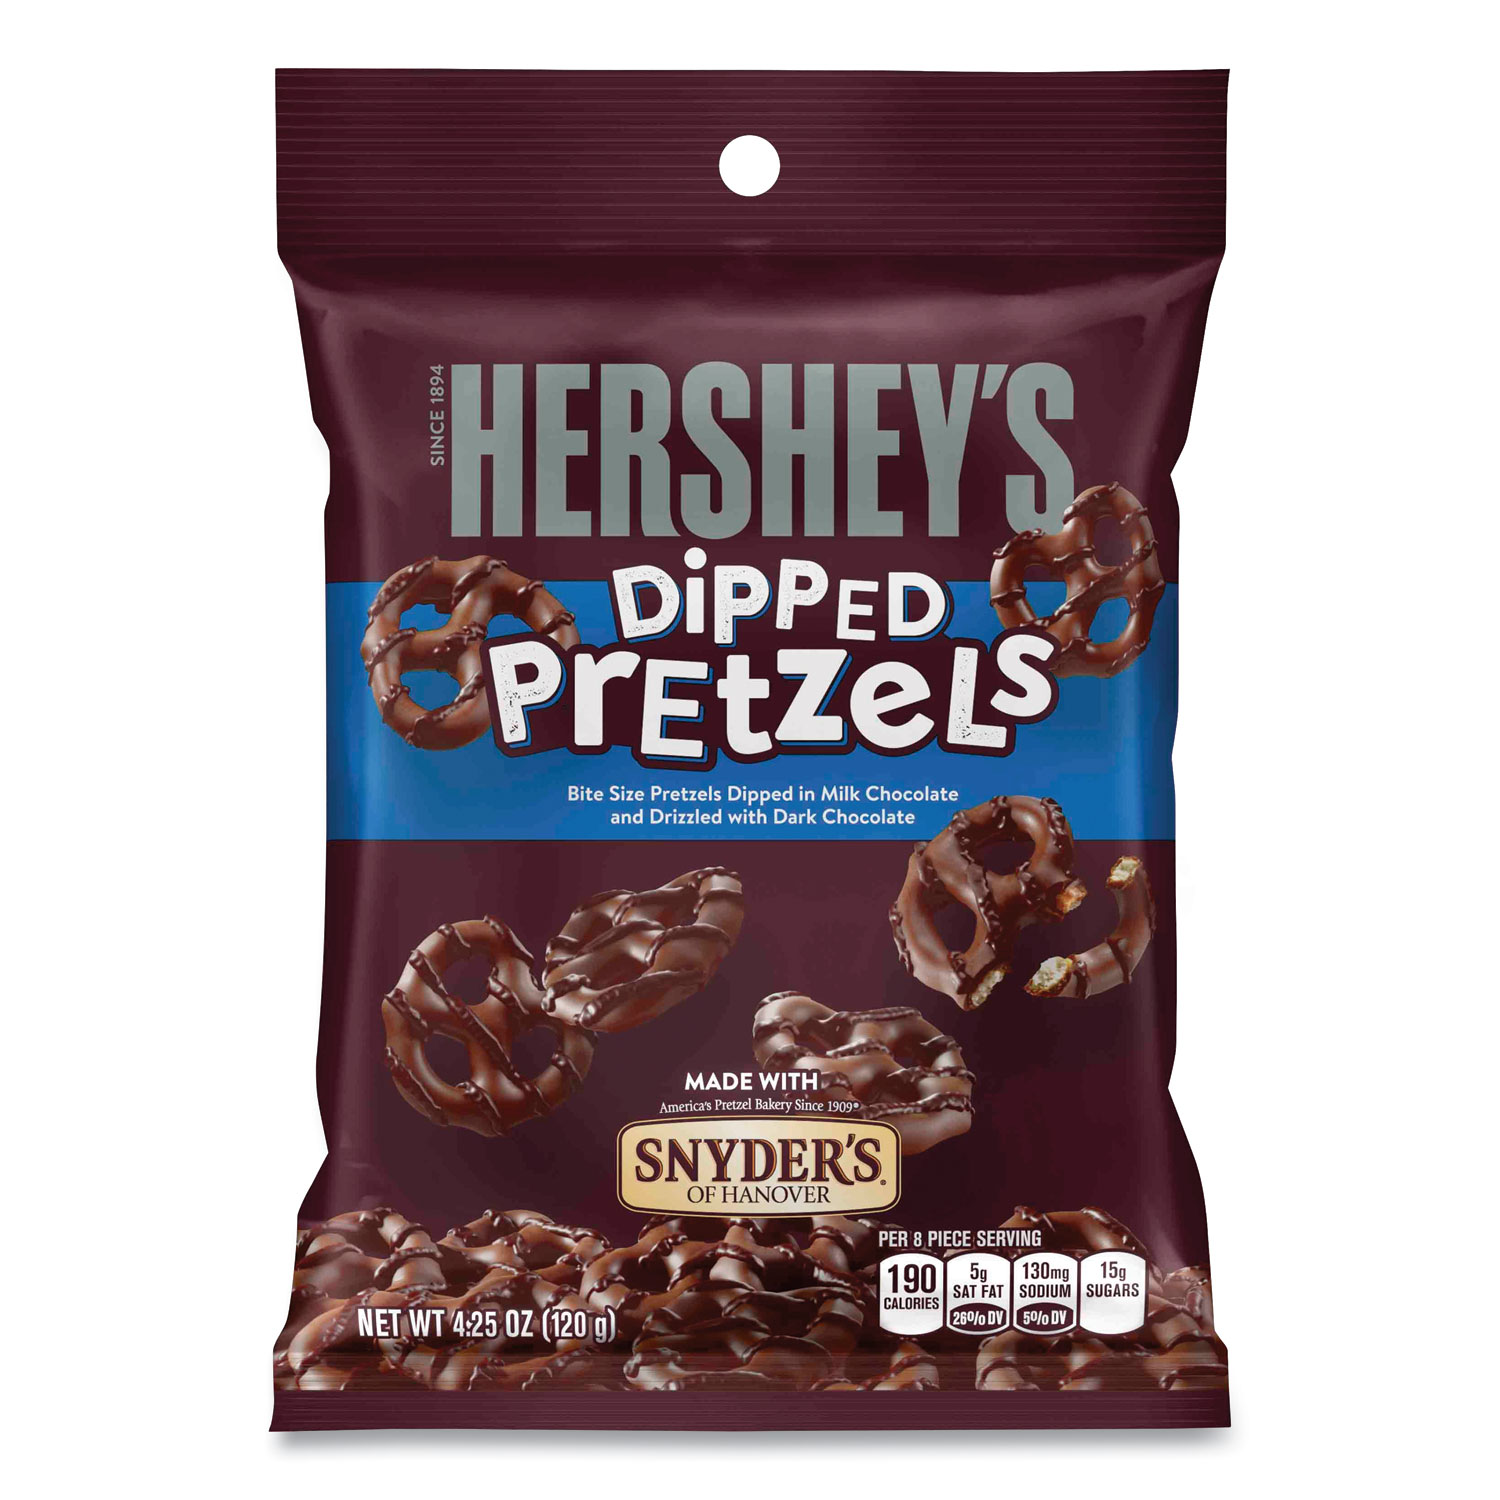  Hershey's 21460 Dipped Pretzels, Milk Chocolate, 4.25 oz Bag, 4 Bags/Pack, Free Delivery in 1-4 Business Days (GRR24600289) 